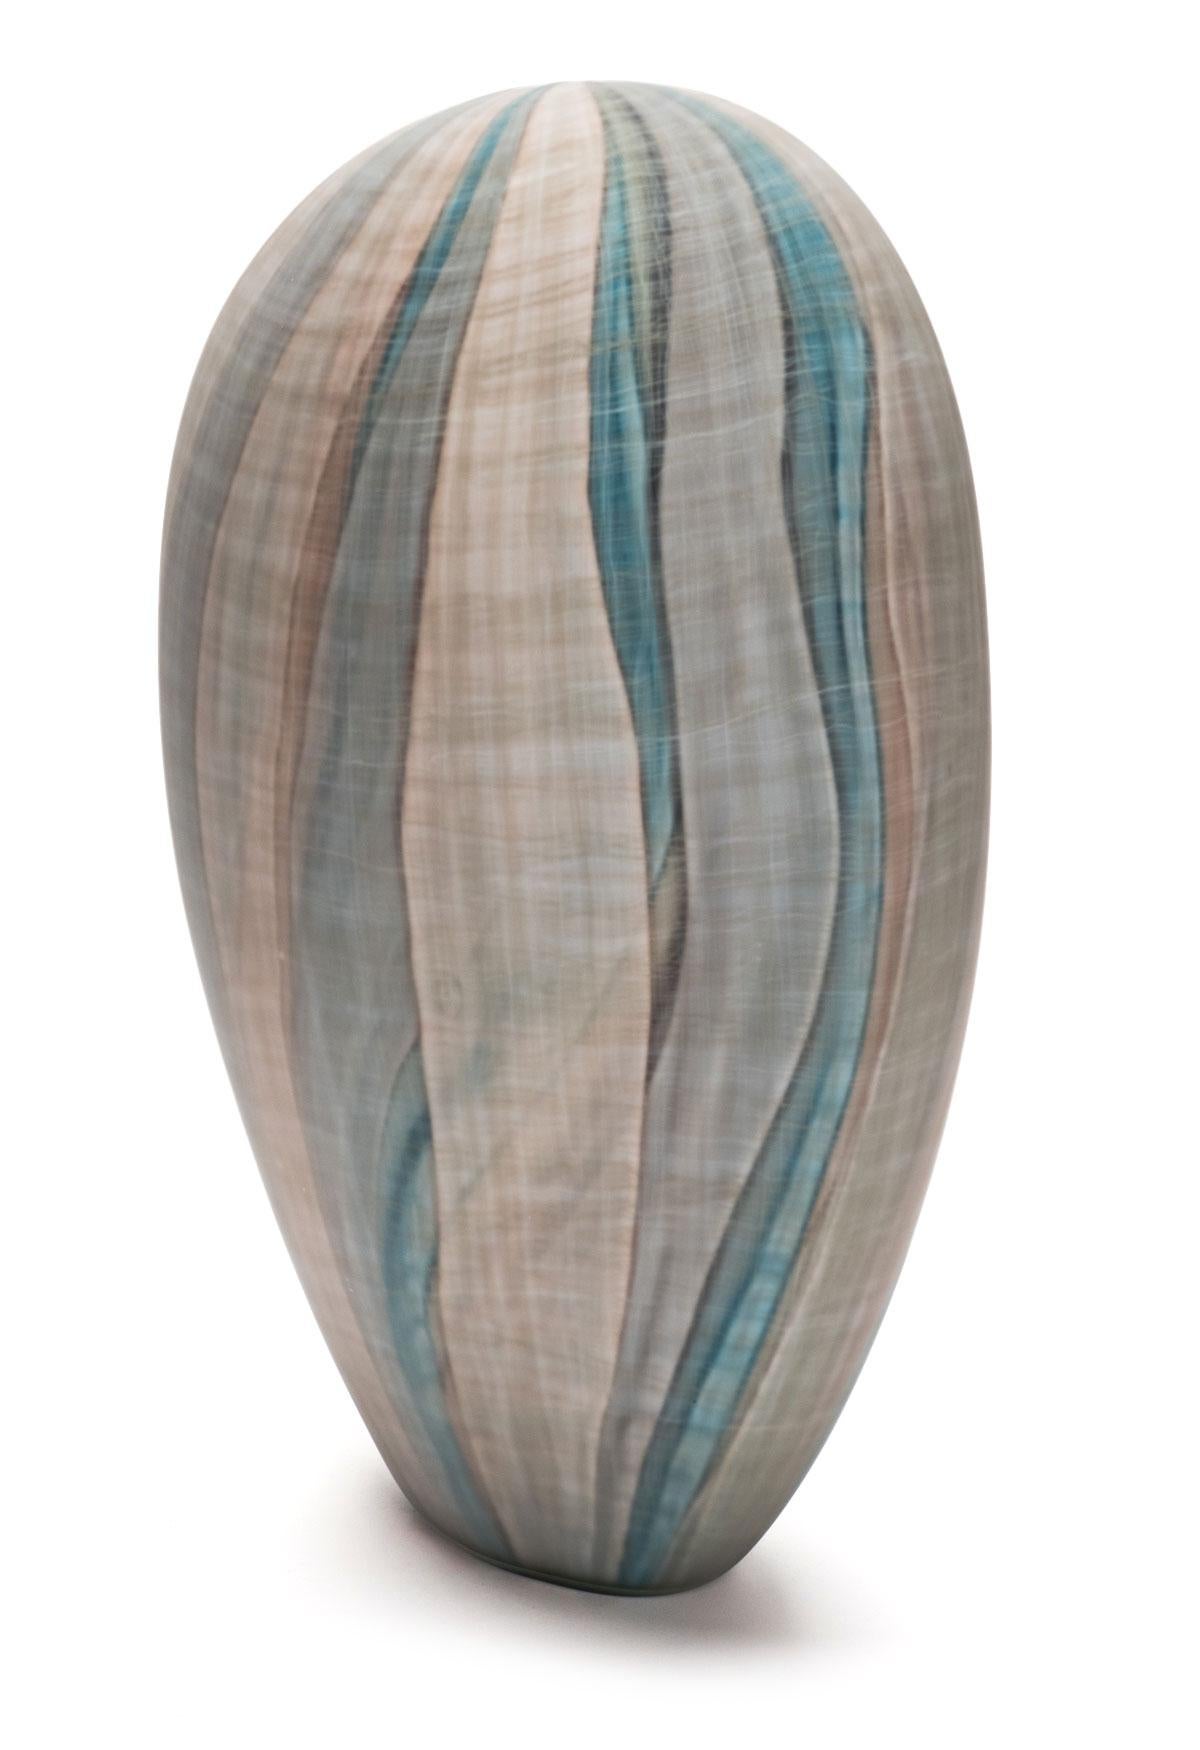 Inspired by experiences in the natural world for many years now, Clare Belfrage has forged an international reputation for her distinguished work with detailed and complex glass drawing on blown glass forms.